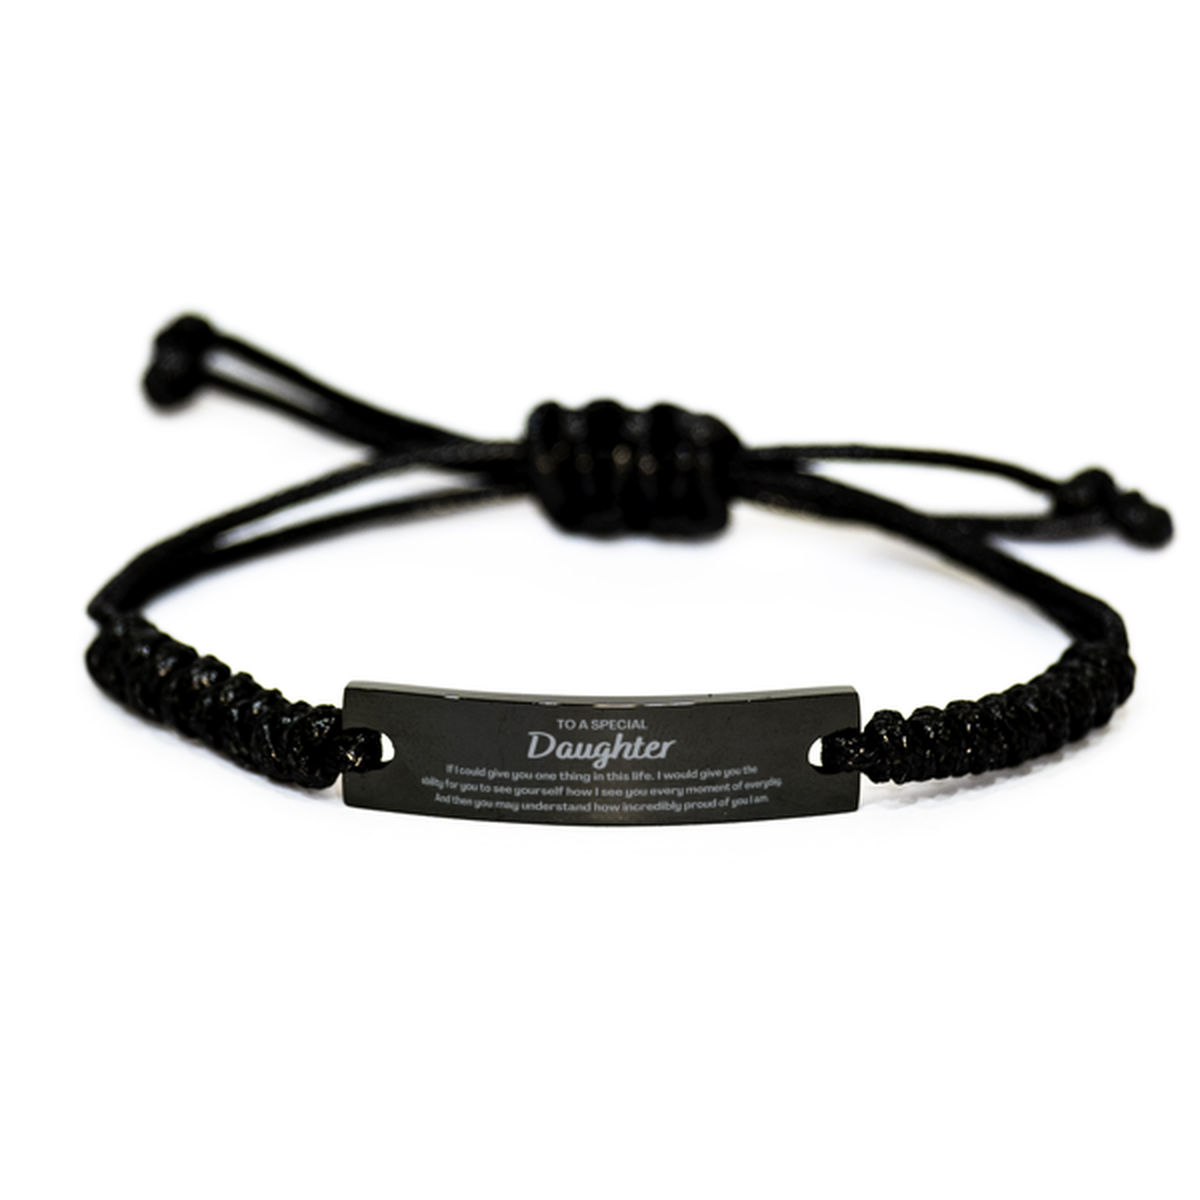 To My Daughter Black Rope Bracelet, Gifts For Daughter Engraved, Inspirational Gifts for Christmas Birthday, Epic Gifts for Daughter To A Special Daughter how incredibly proud of you I am